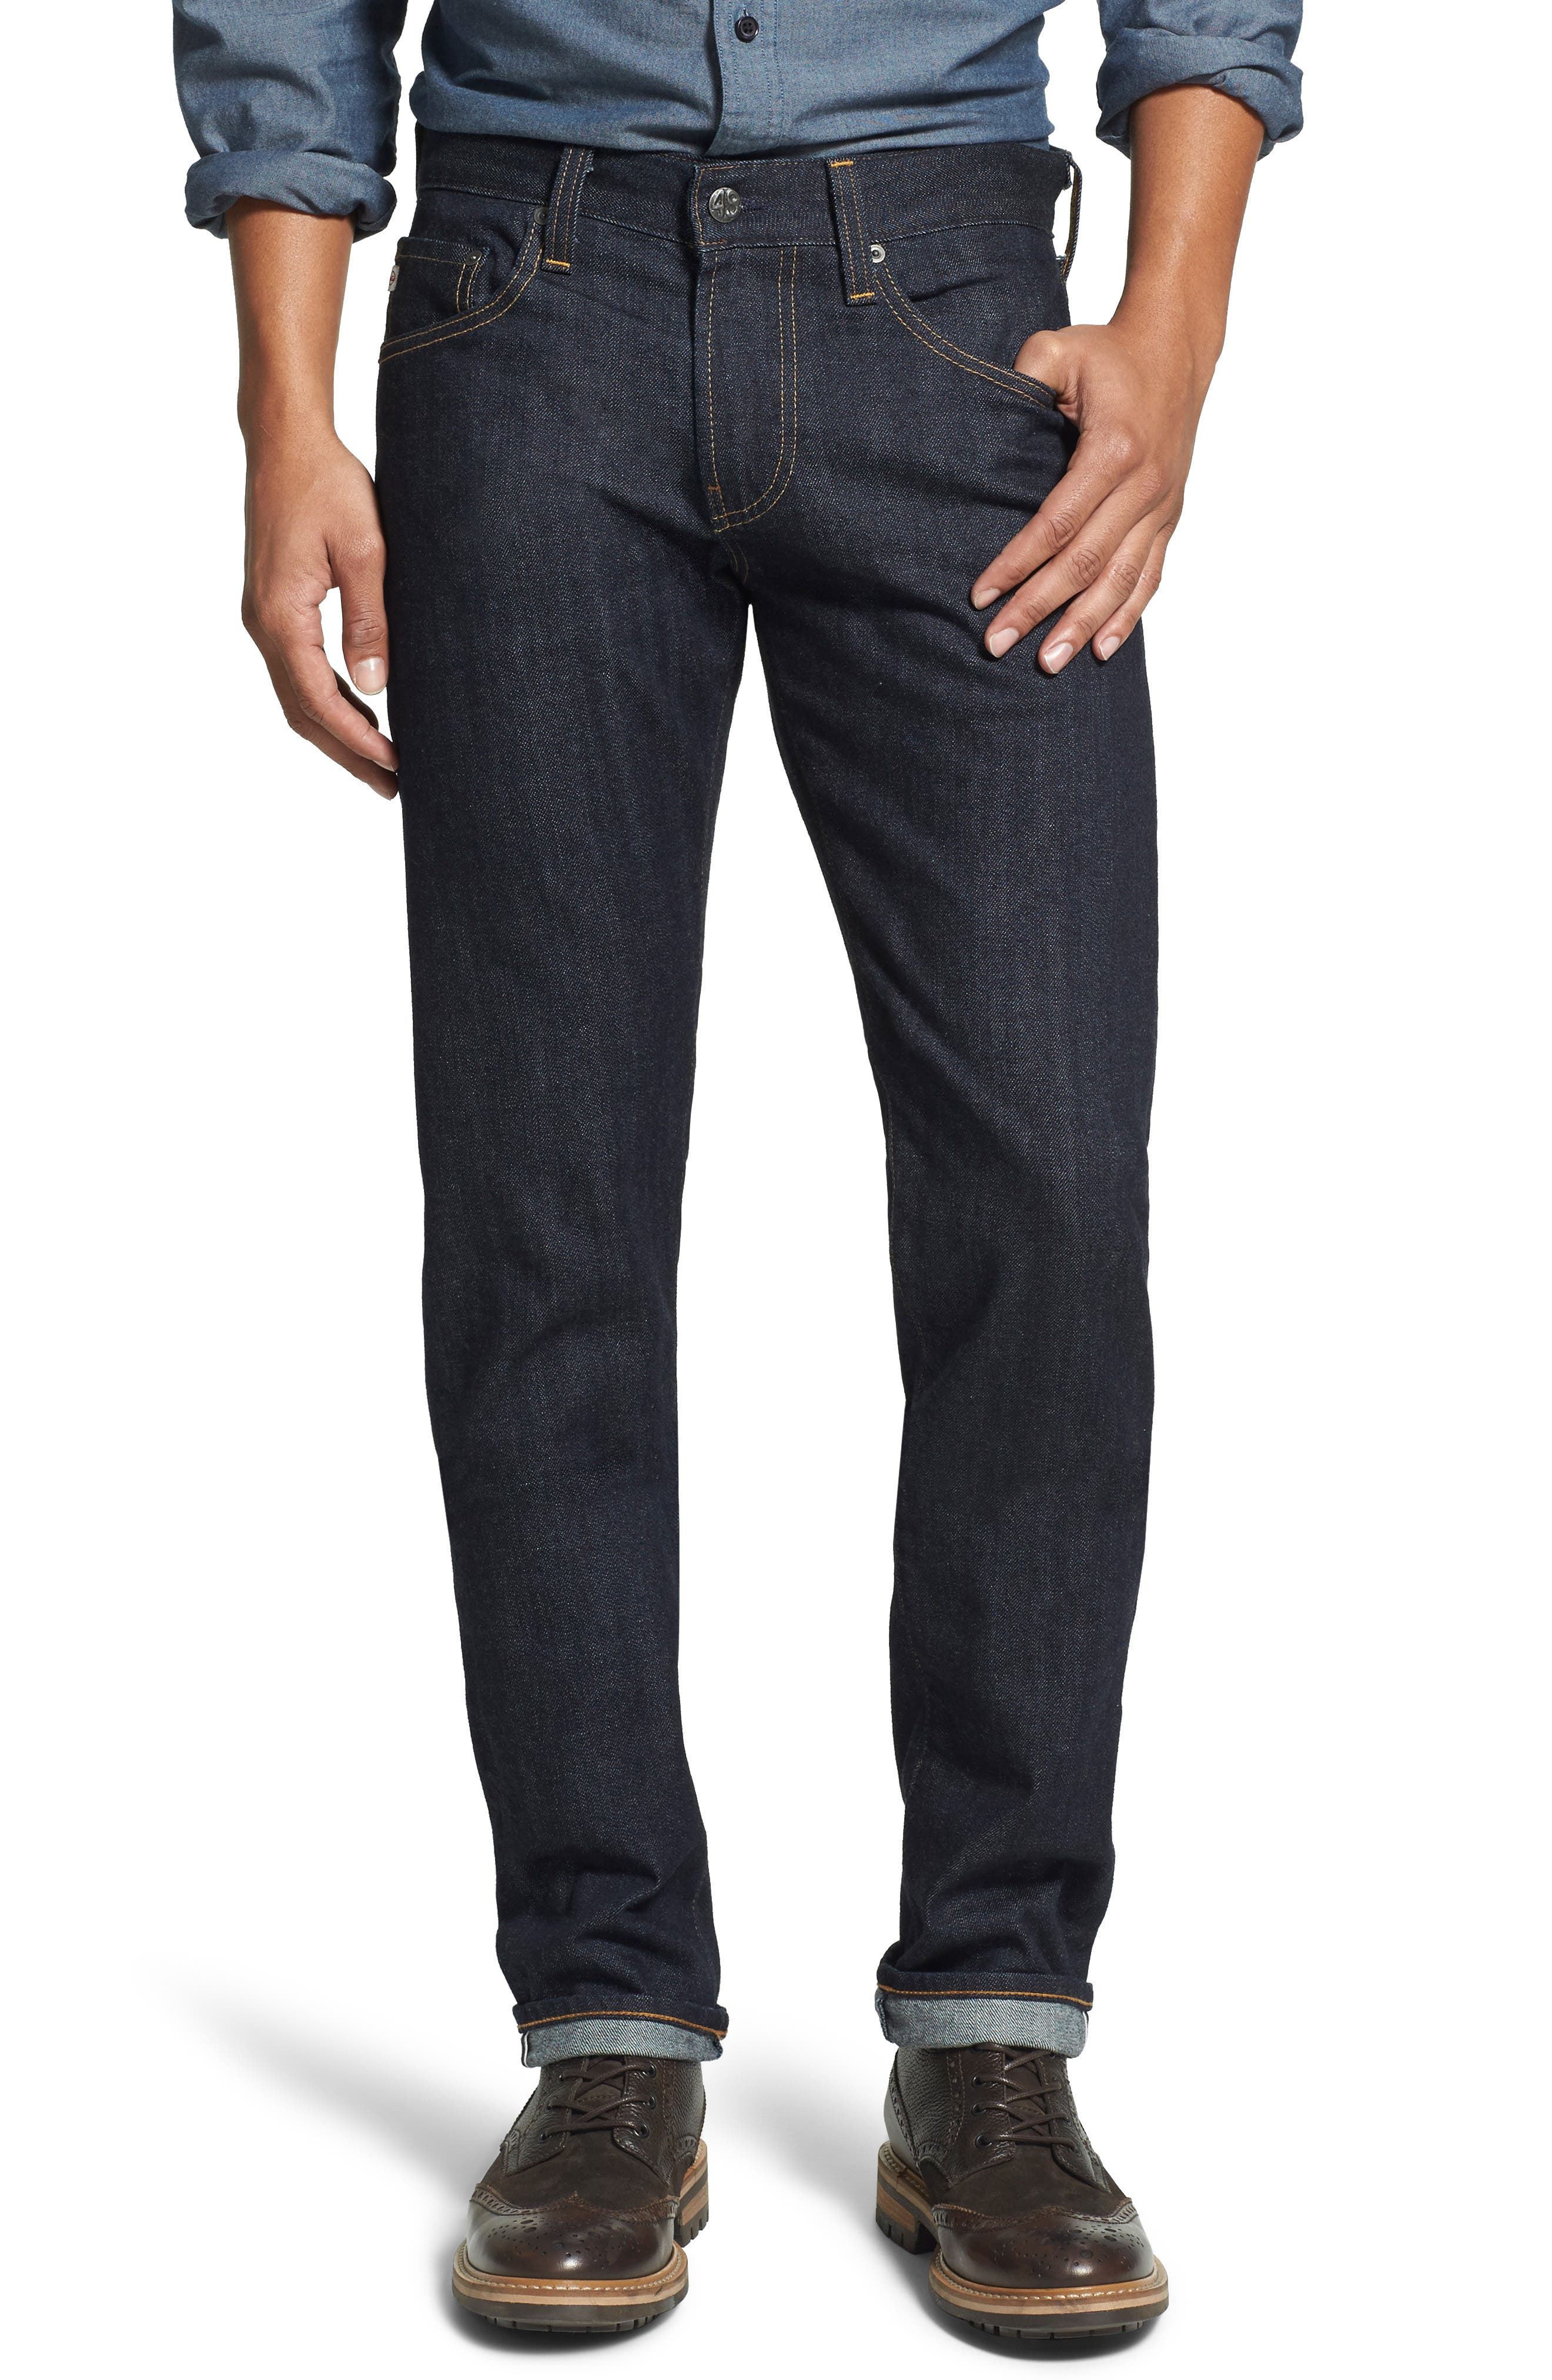 levi's 315 shaping bootcut plus